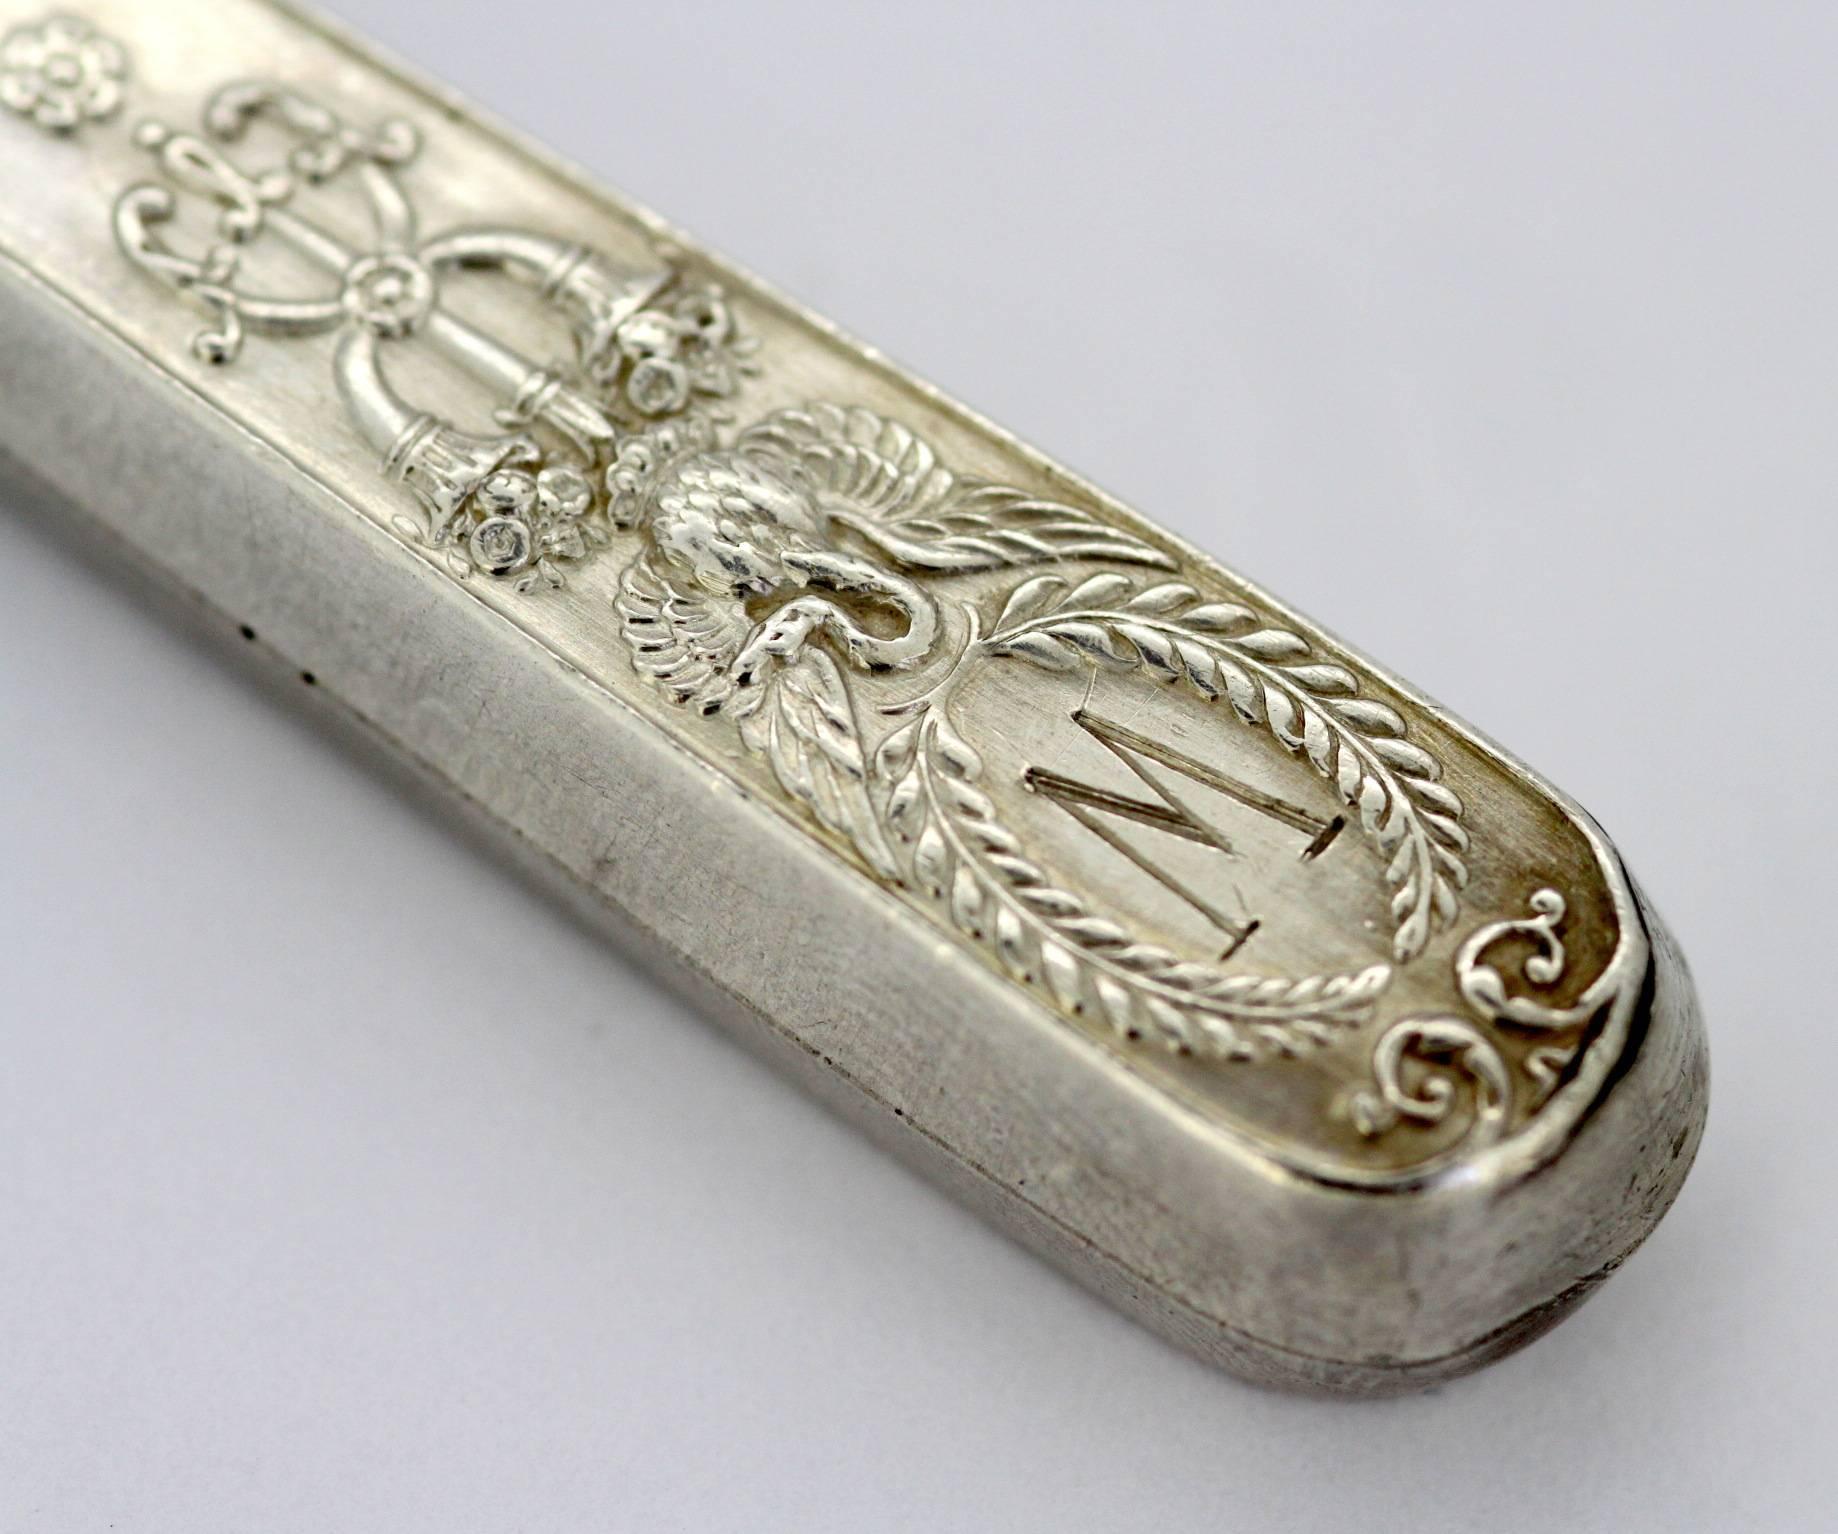 Late 19th Century Fabergé, Antique Solid Silver Fork with Initials, circa 1870s